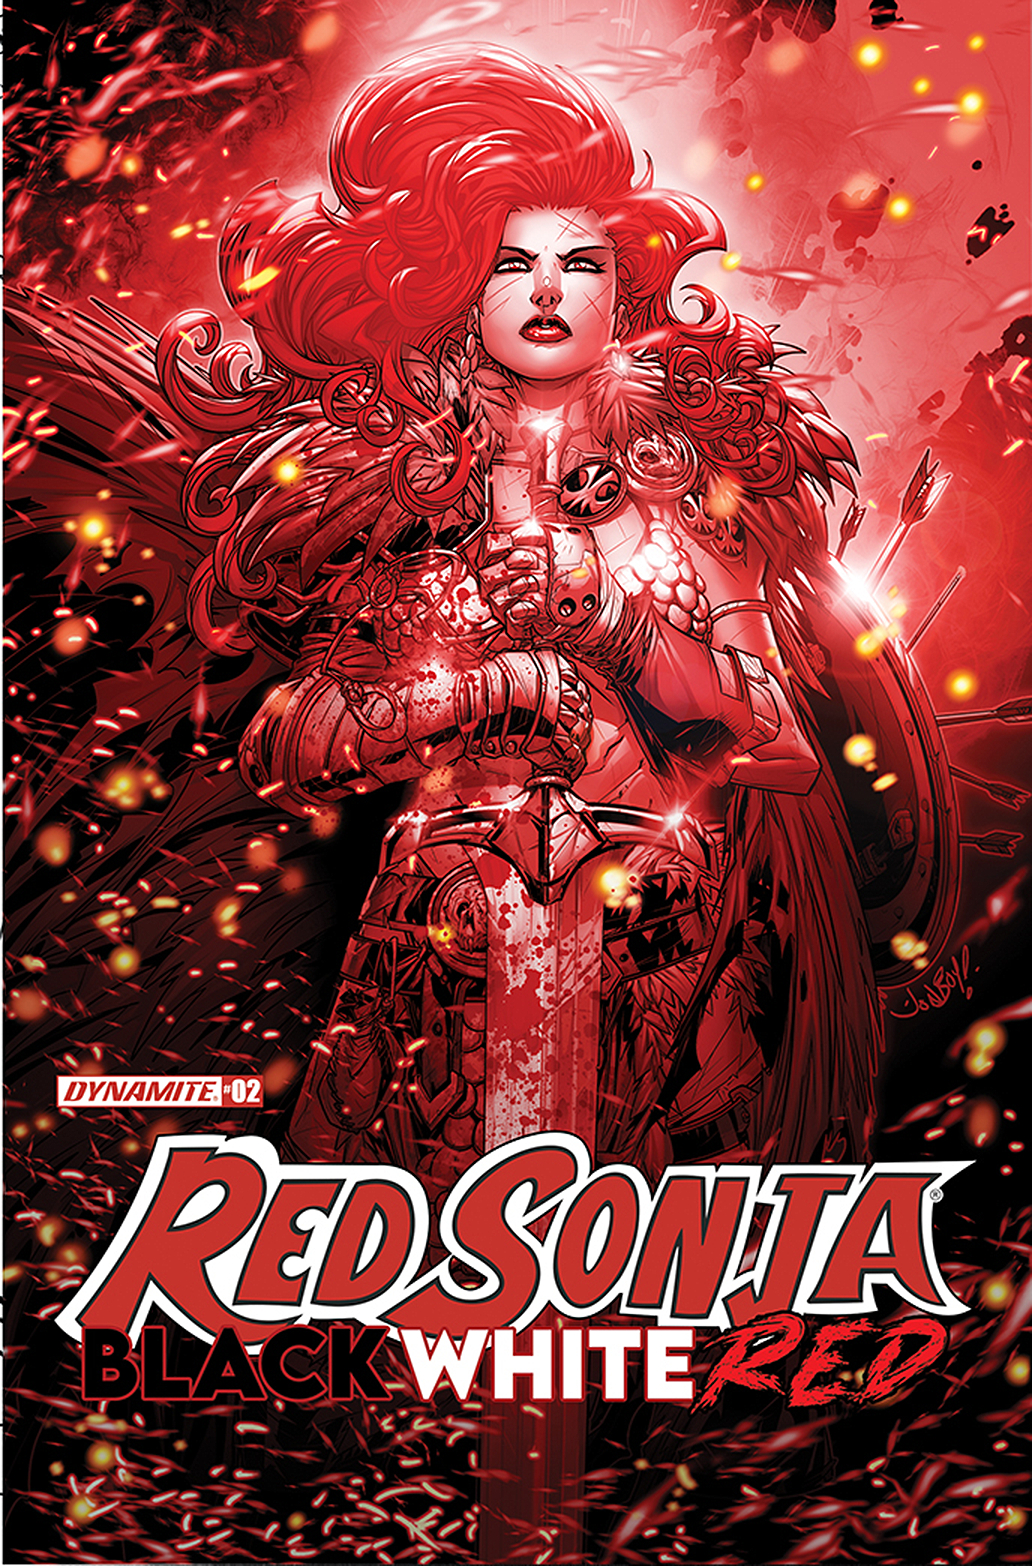 Red Sonja Black White Red #2 Cover B Meyers